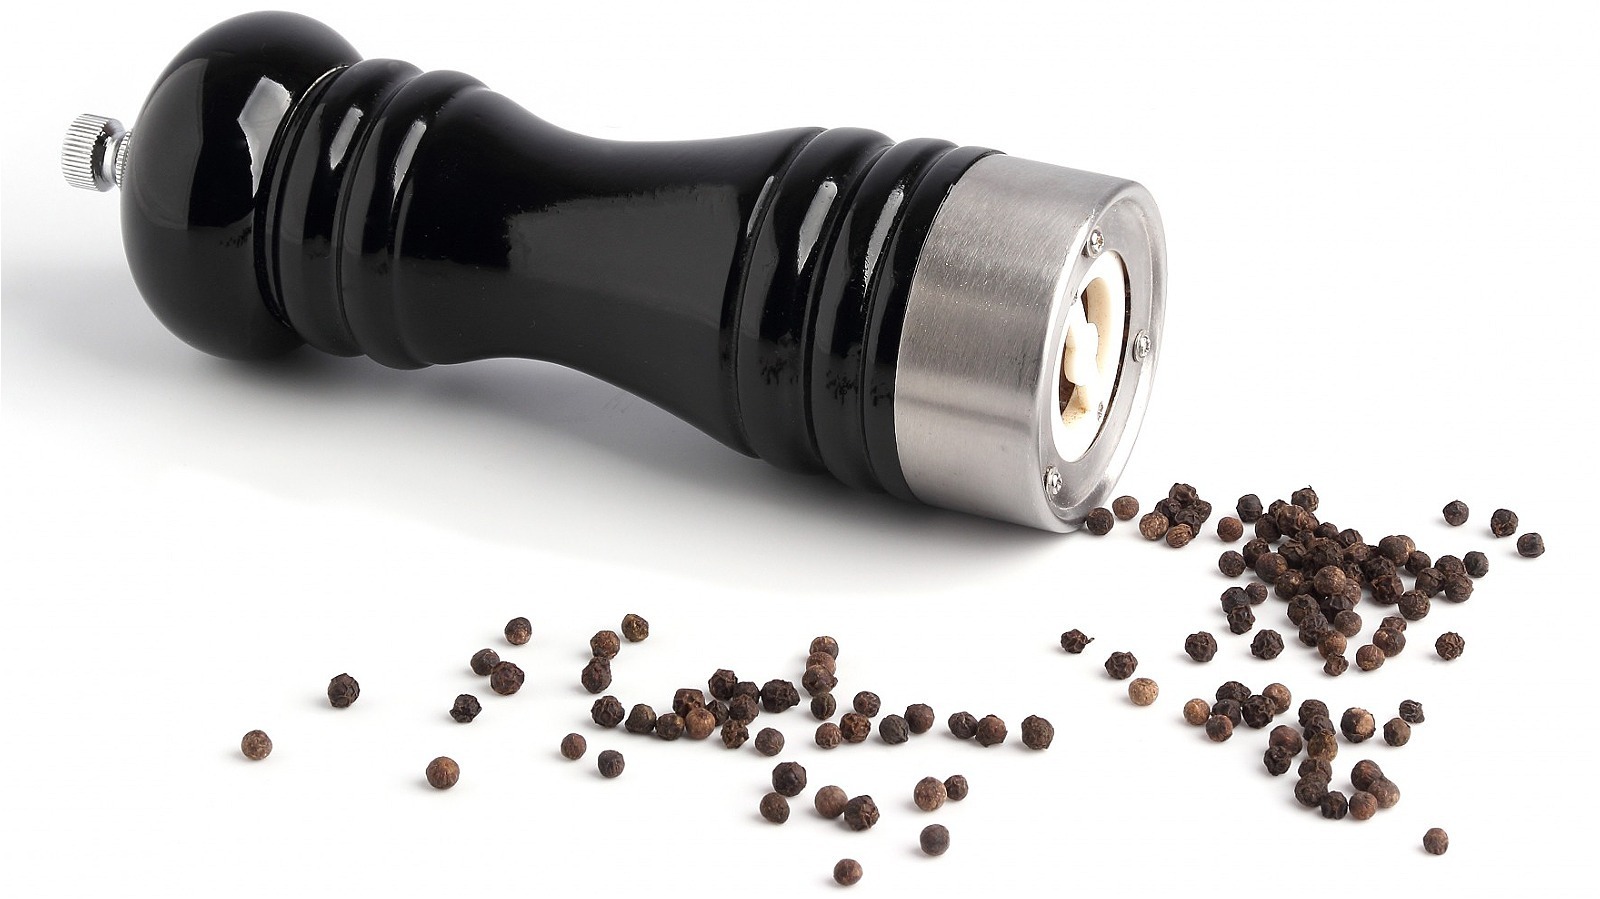 https://www.mashed.com/img/gallery/the-problem-aldi-shoppers-have-with-its-stonemill-pepper-grinder/l-intro-1641419359.jpg